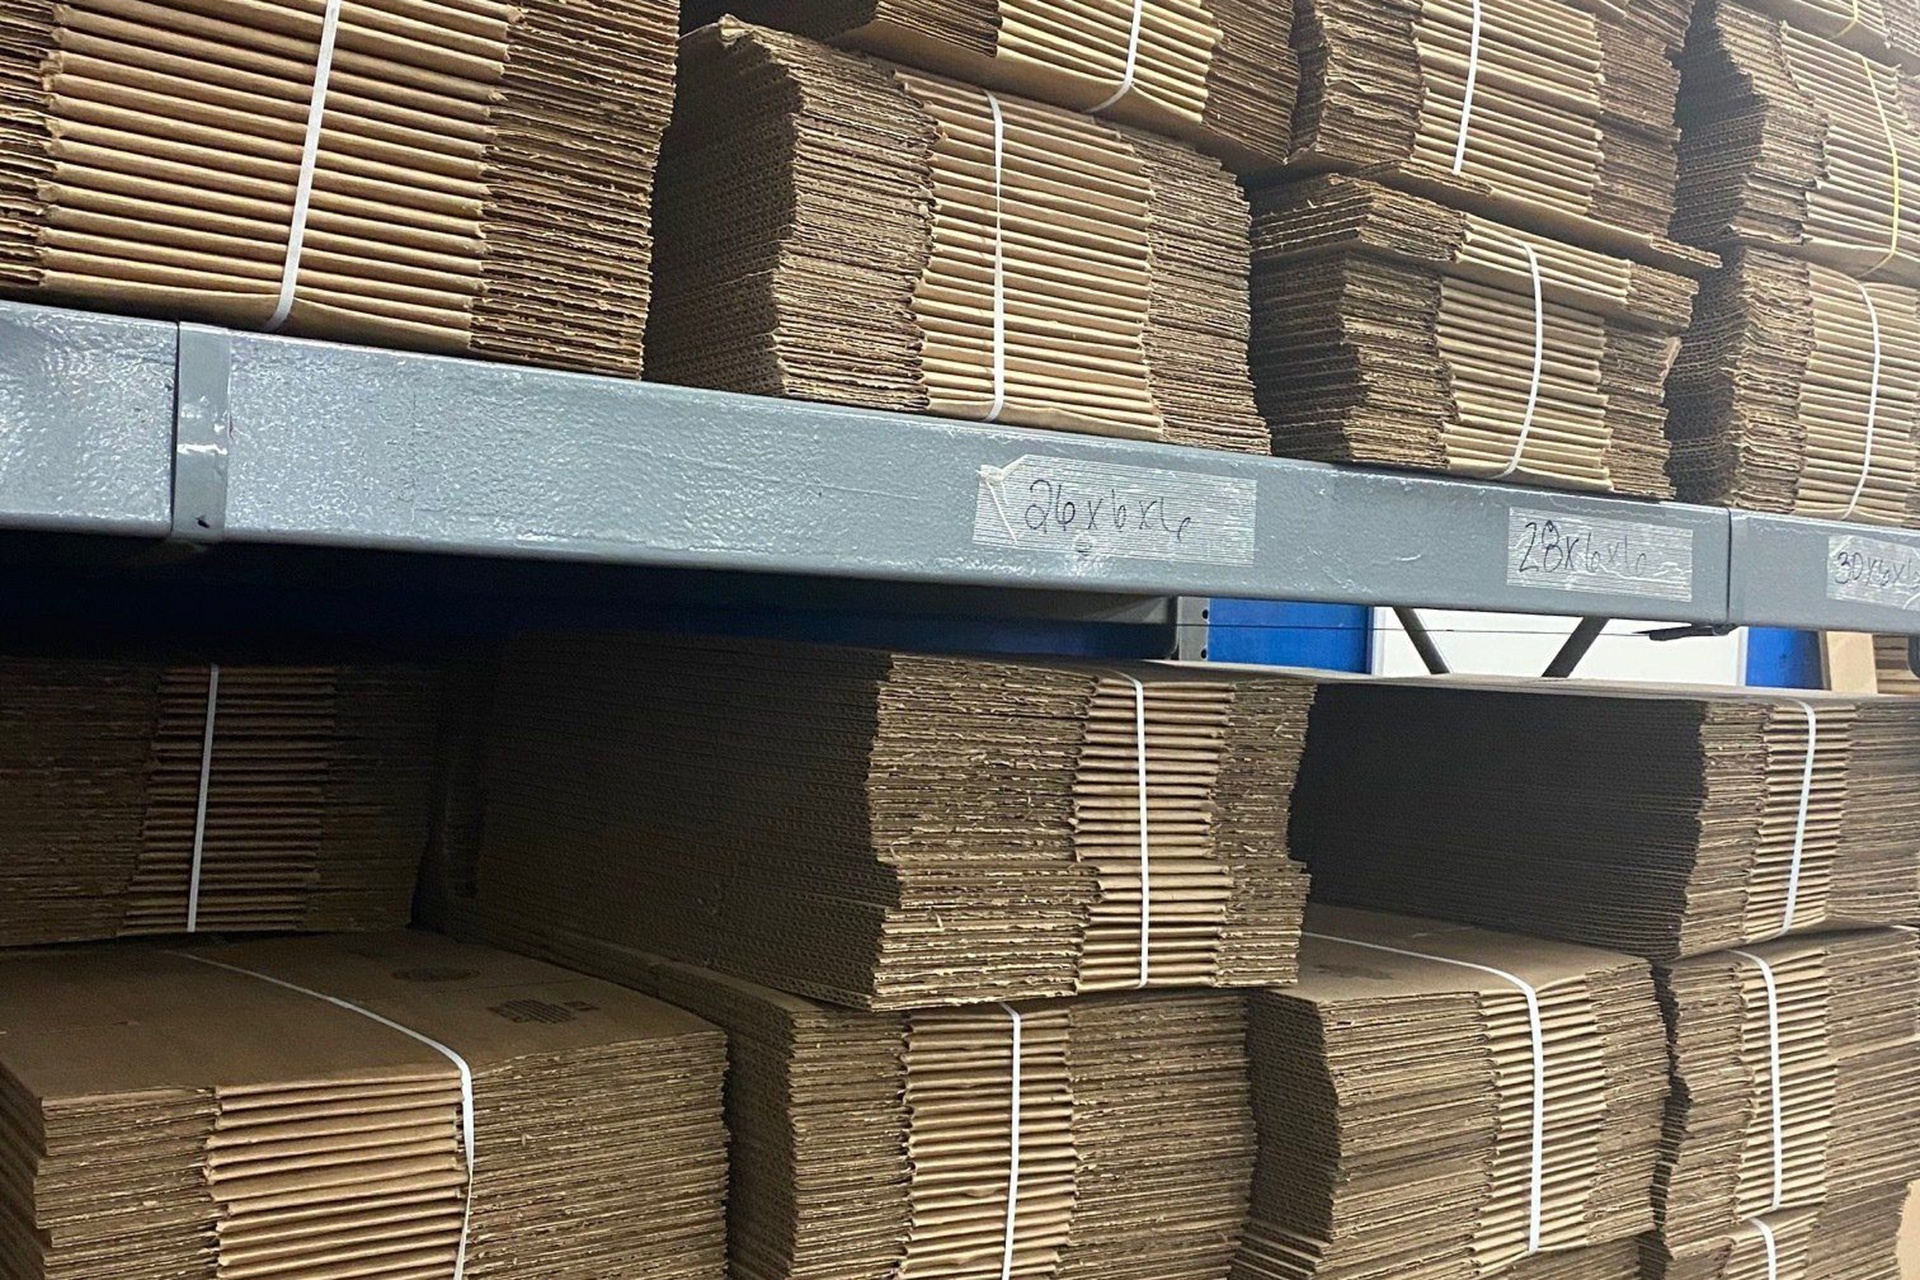 New cardboard boxes stacked on warehouse shelves